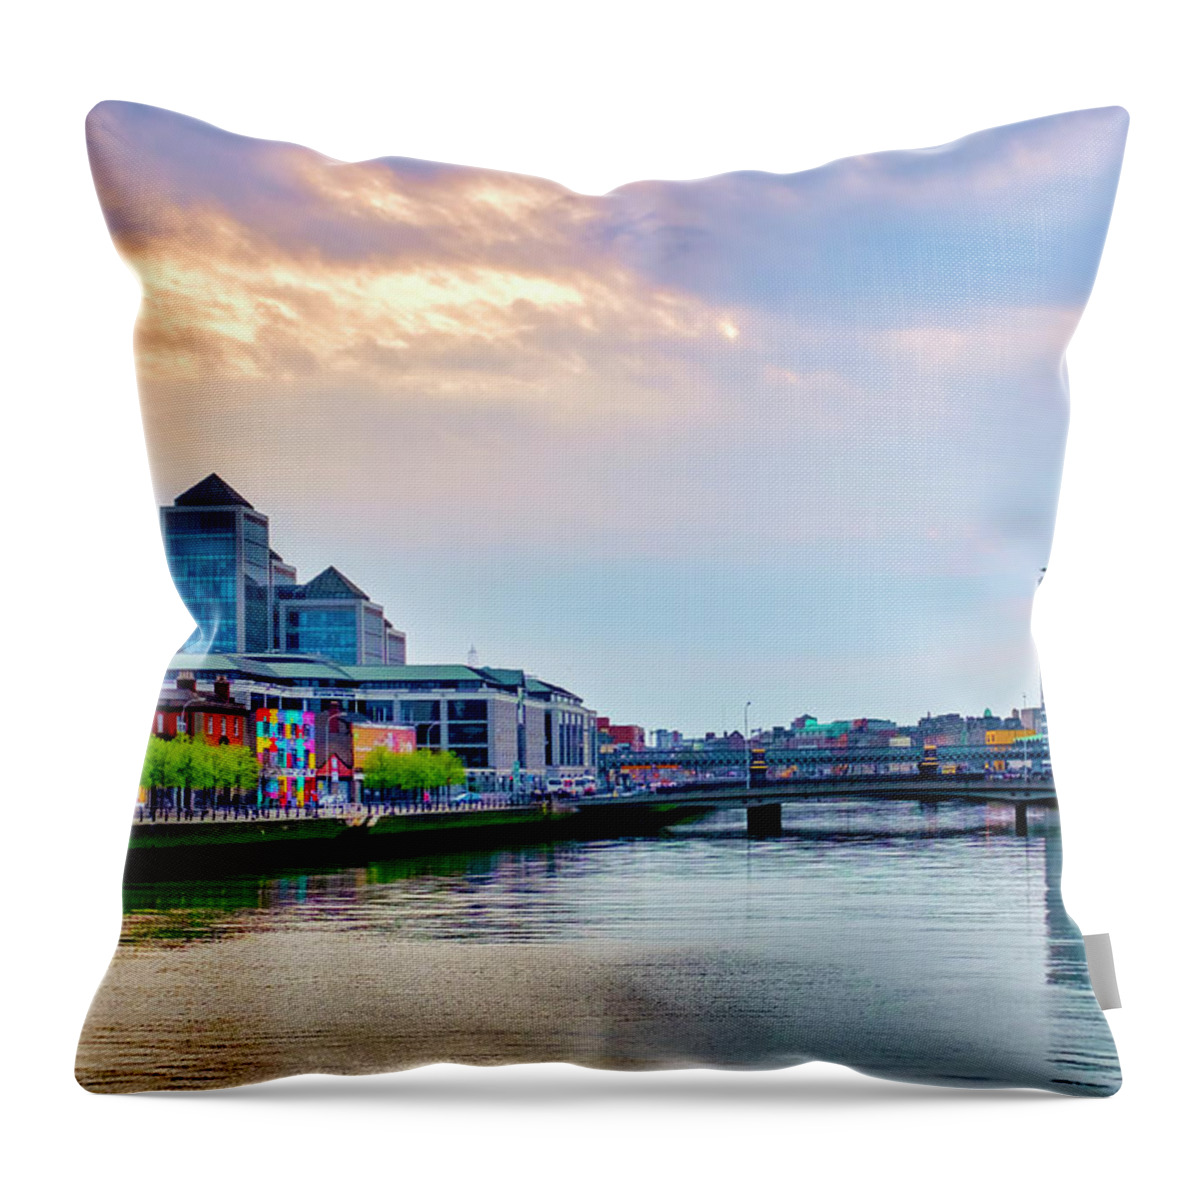 Ireland Throw Pillow featuring the photograph River Liffey by Fabrizio Troiani